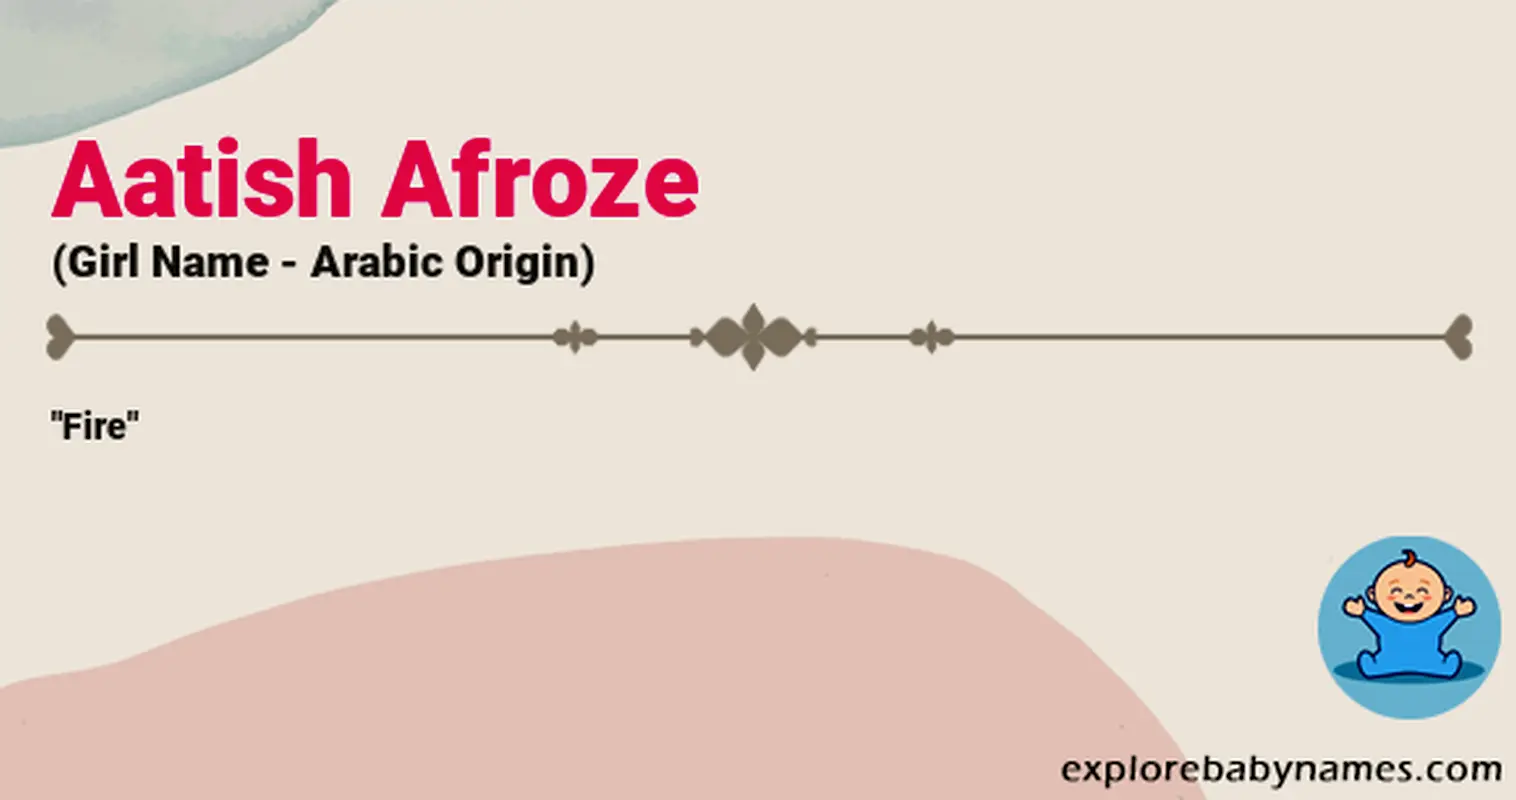 Meaning of Aatish Afroze